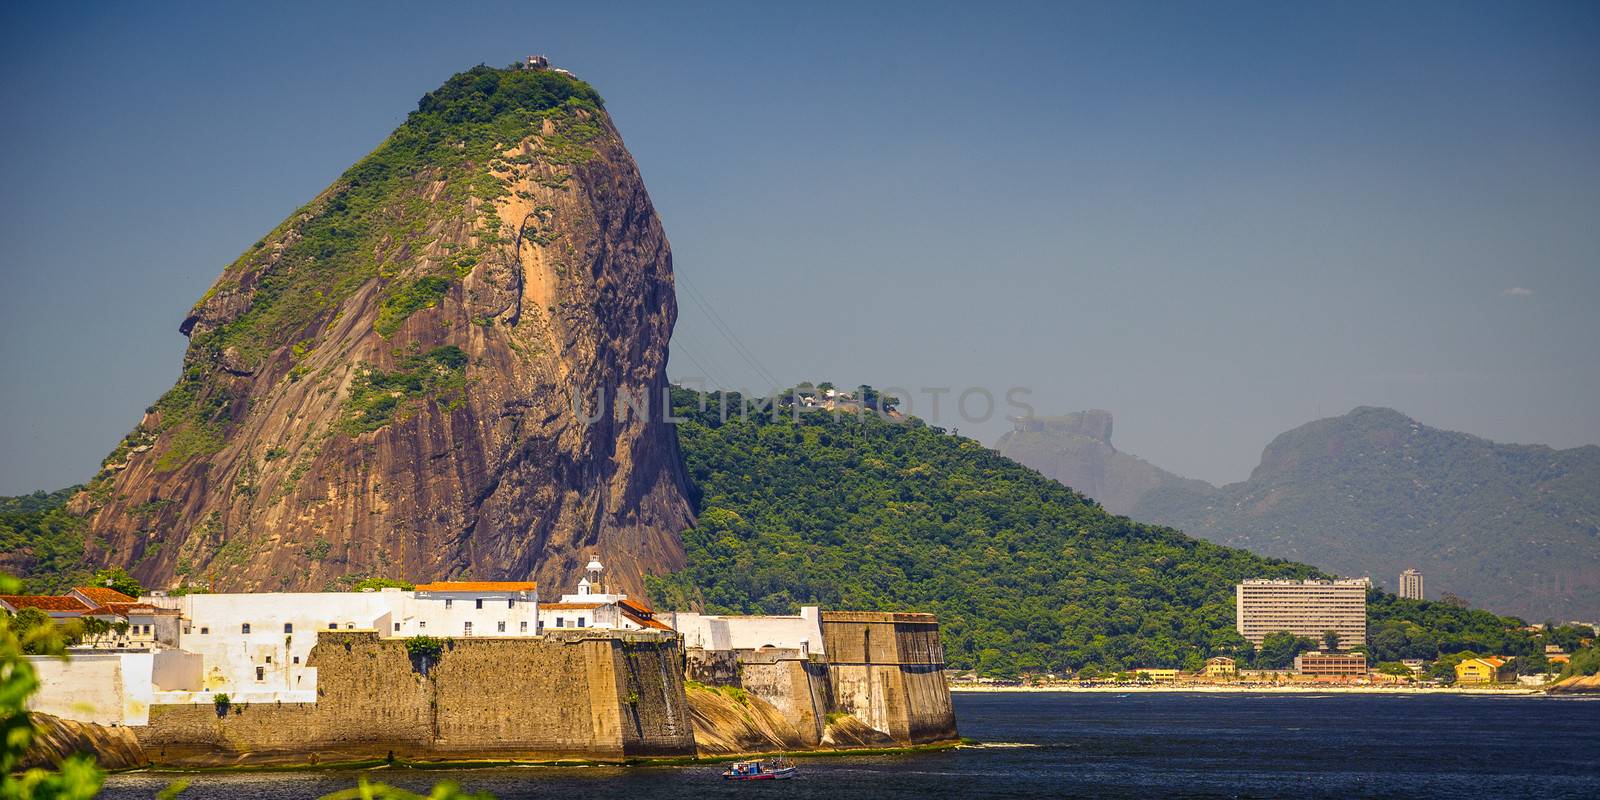 Fortress at the waterfront with Sugarloaf Mountain in the background, Guanabara Bay, Rio De Janeiro, Brazil